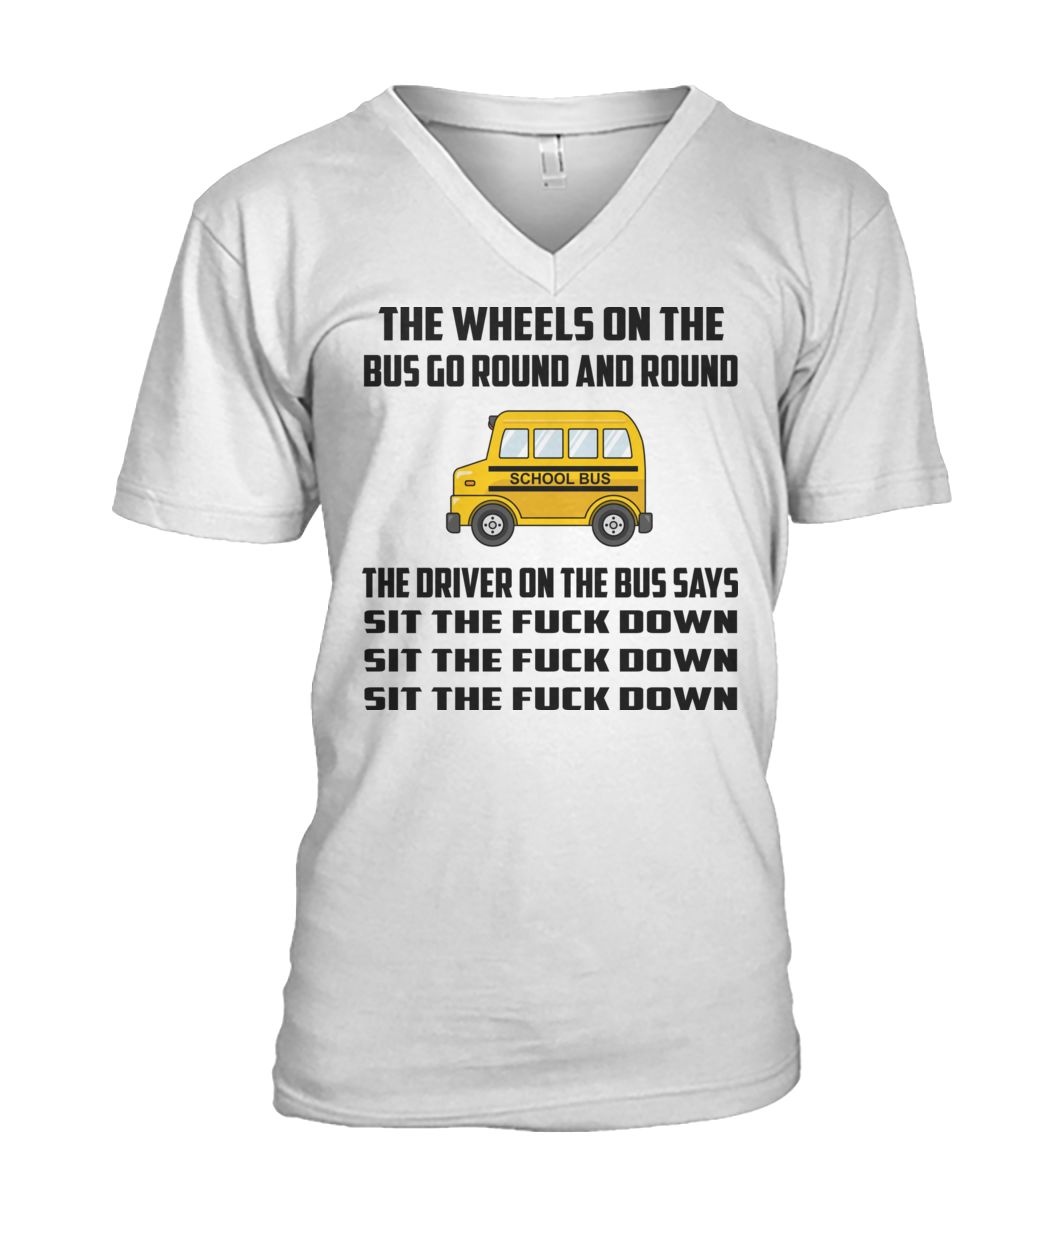 School bus the wheels on the bus go round and round mens v-neck